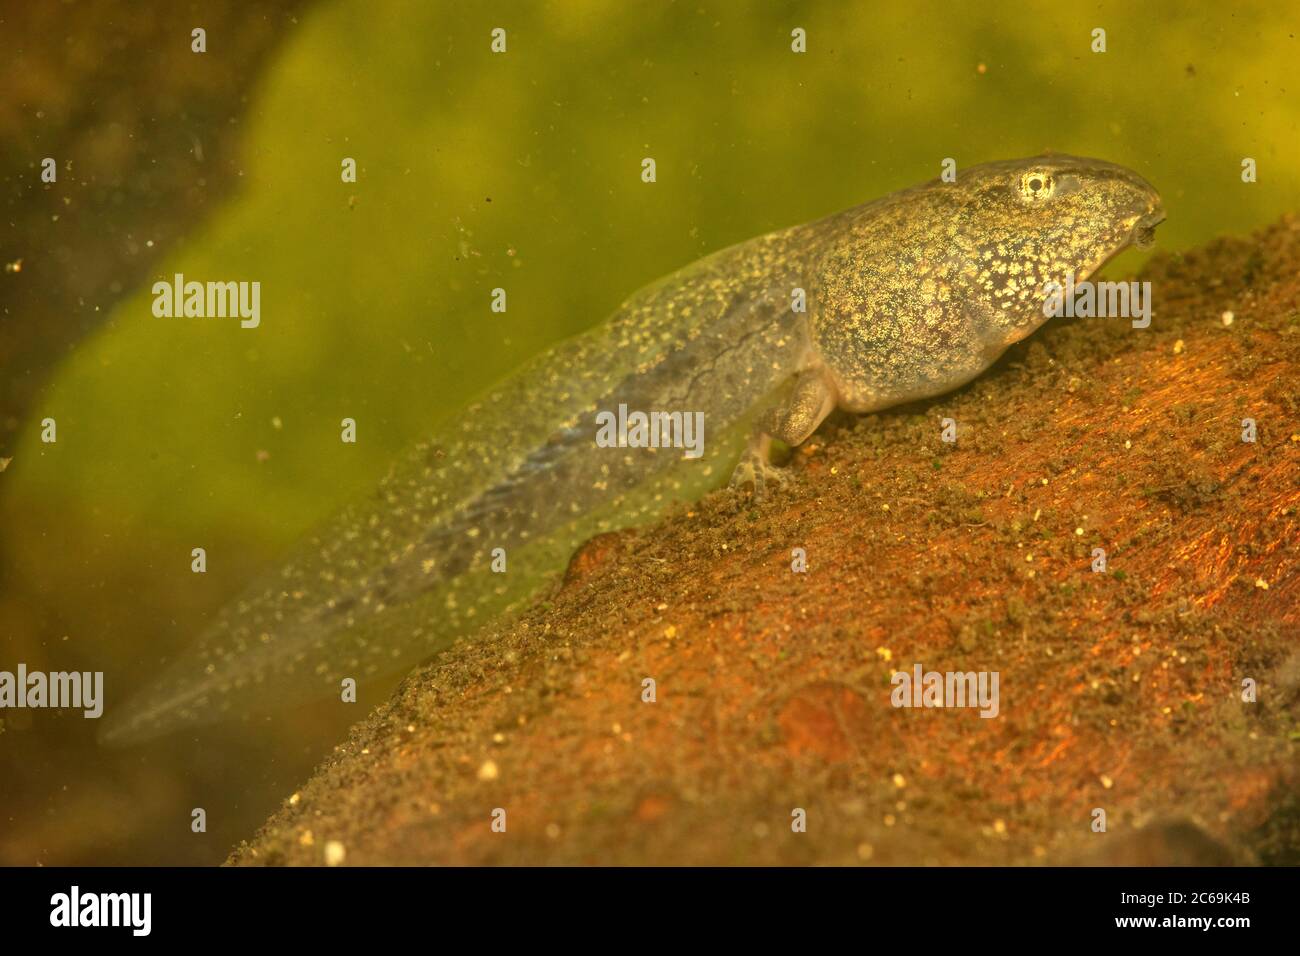 common frog, grass frog (Rana temporaria), larva shortly before the development of the front legs, Germany Stock Photo